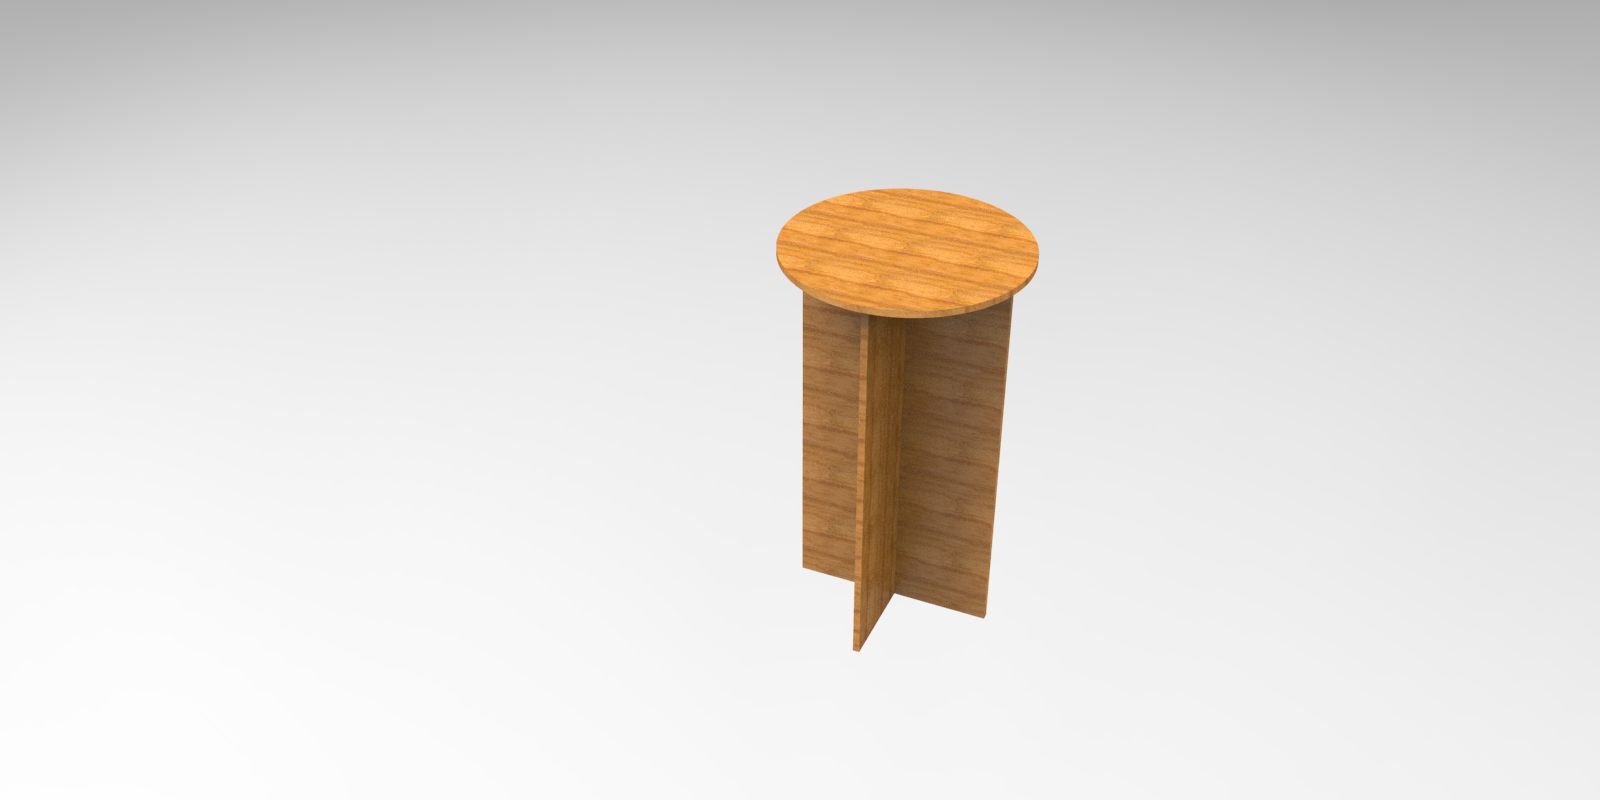 10 Mm MDF Chair Stool Free DXF File